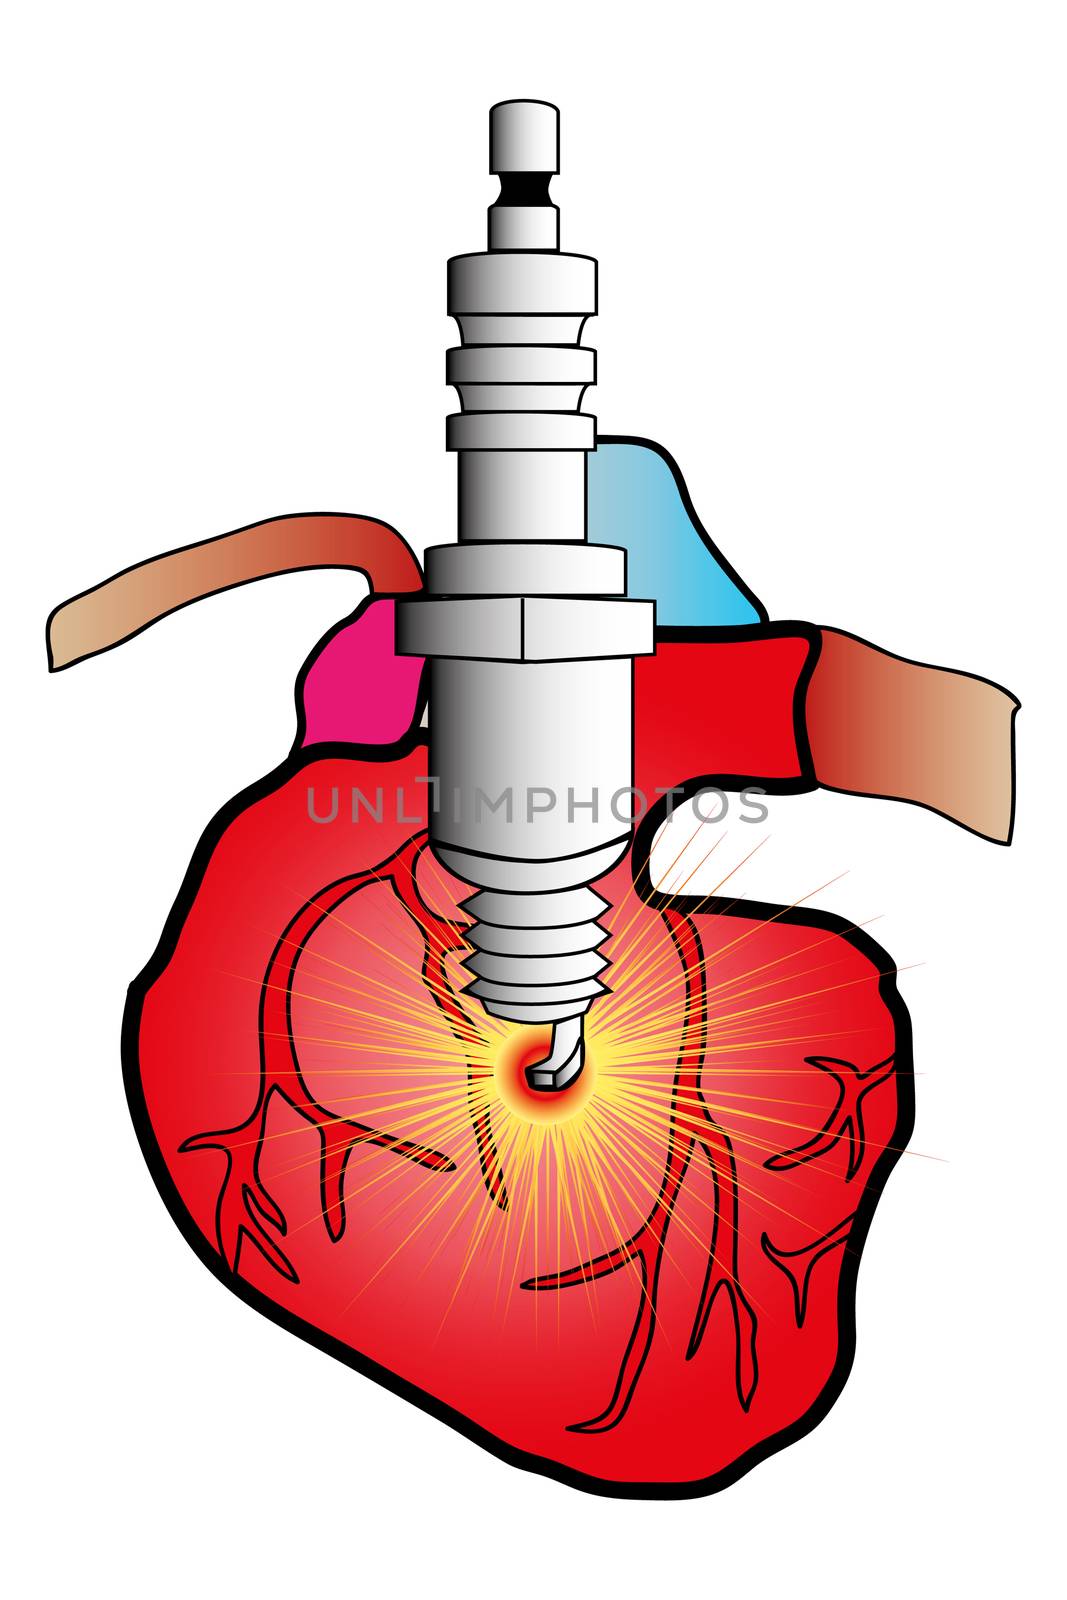 illustration of a heart in cardiovascular surgery cut with a spark plug as defibrillator